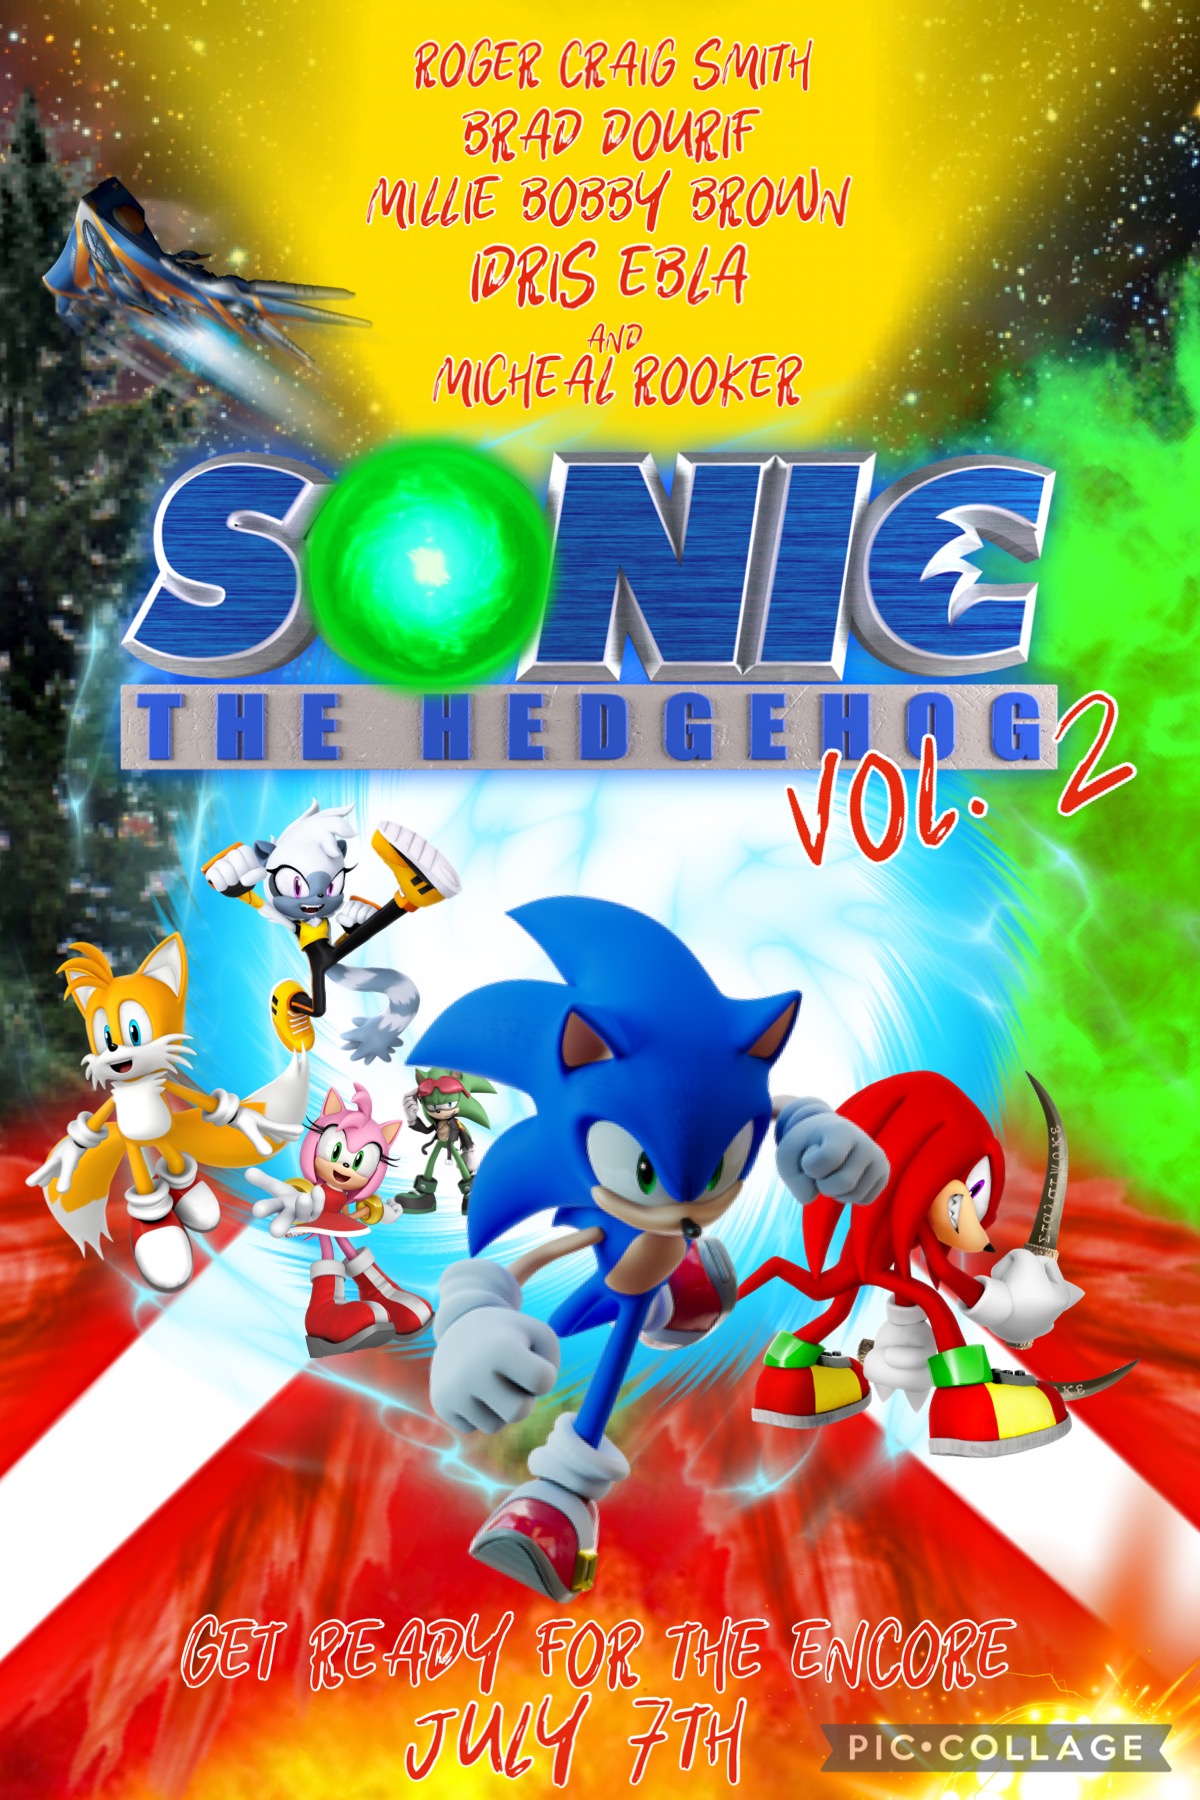 Sonic the Hedgehog 2 - Wikiwand